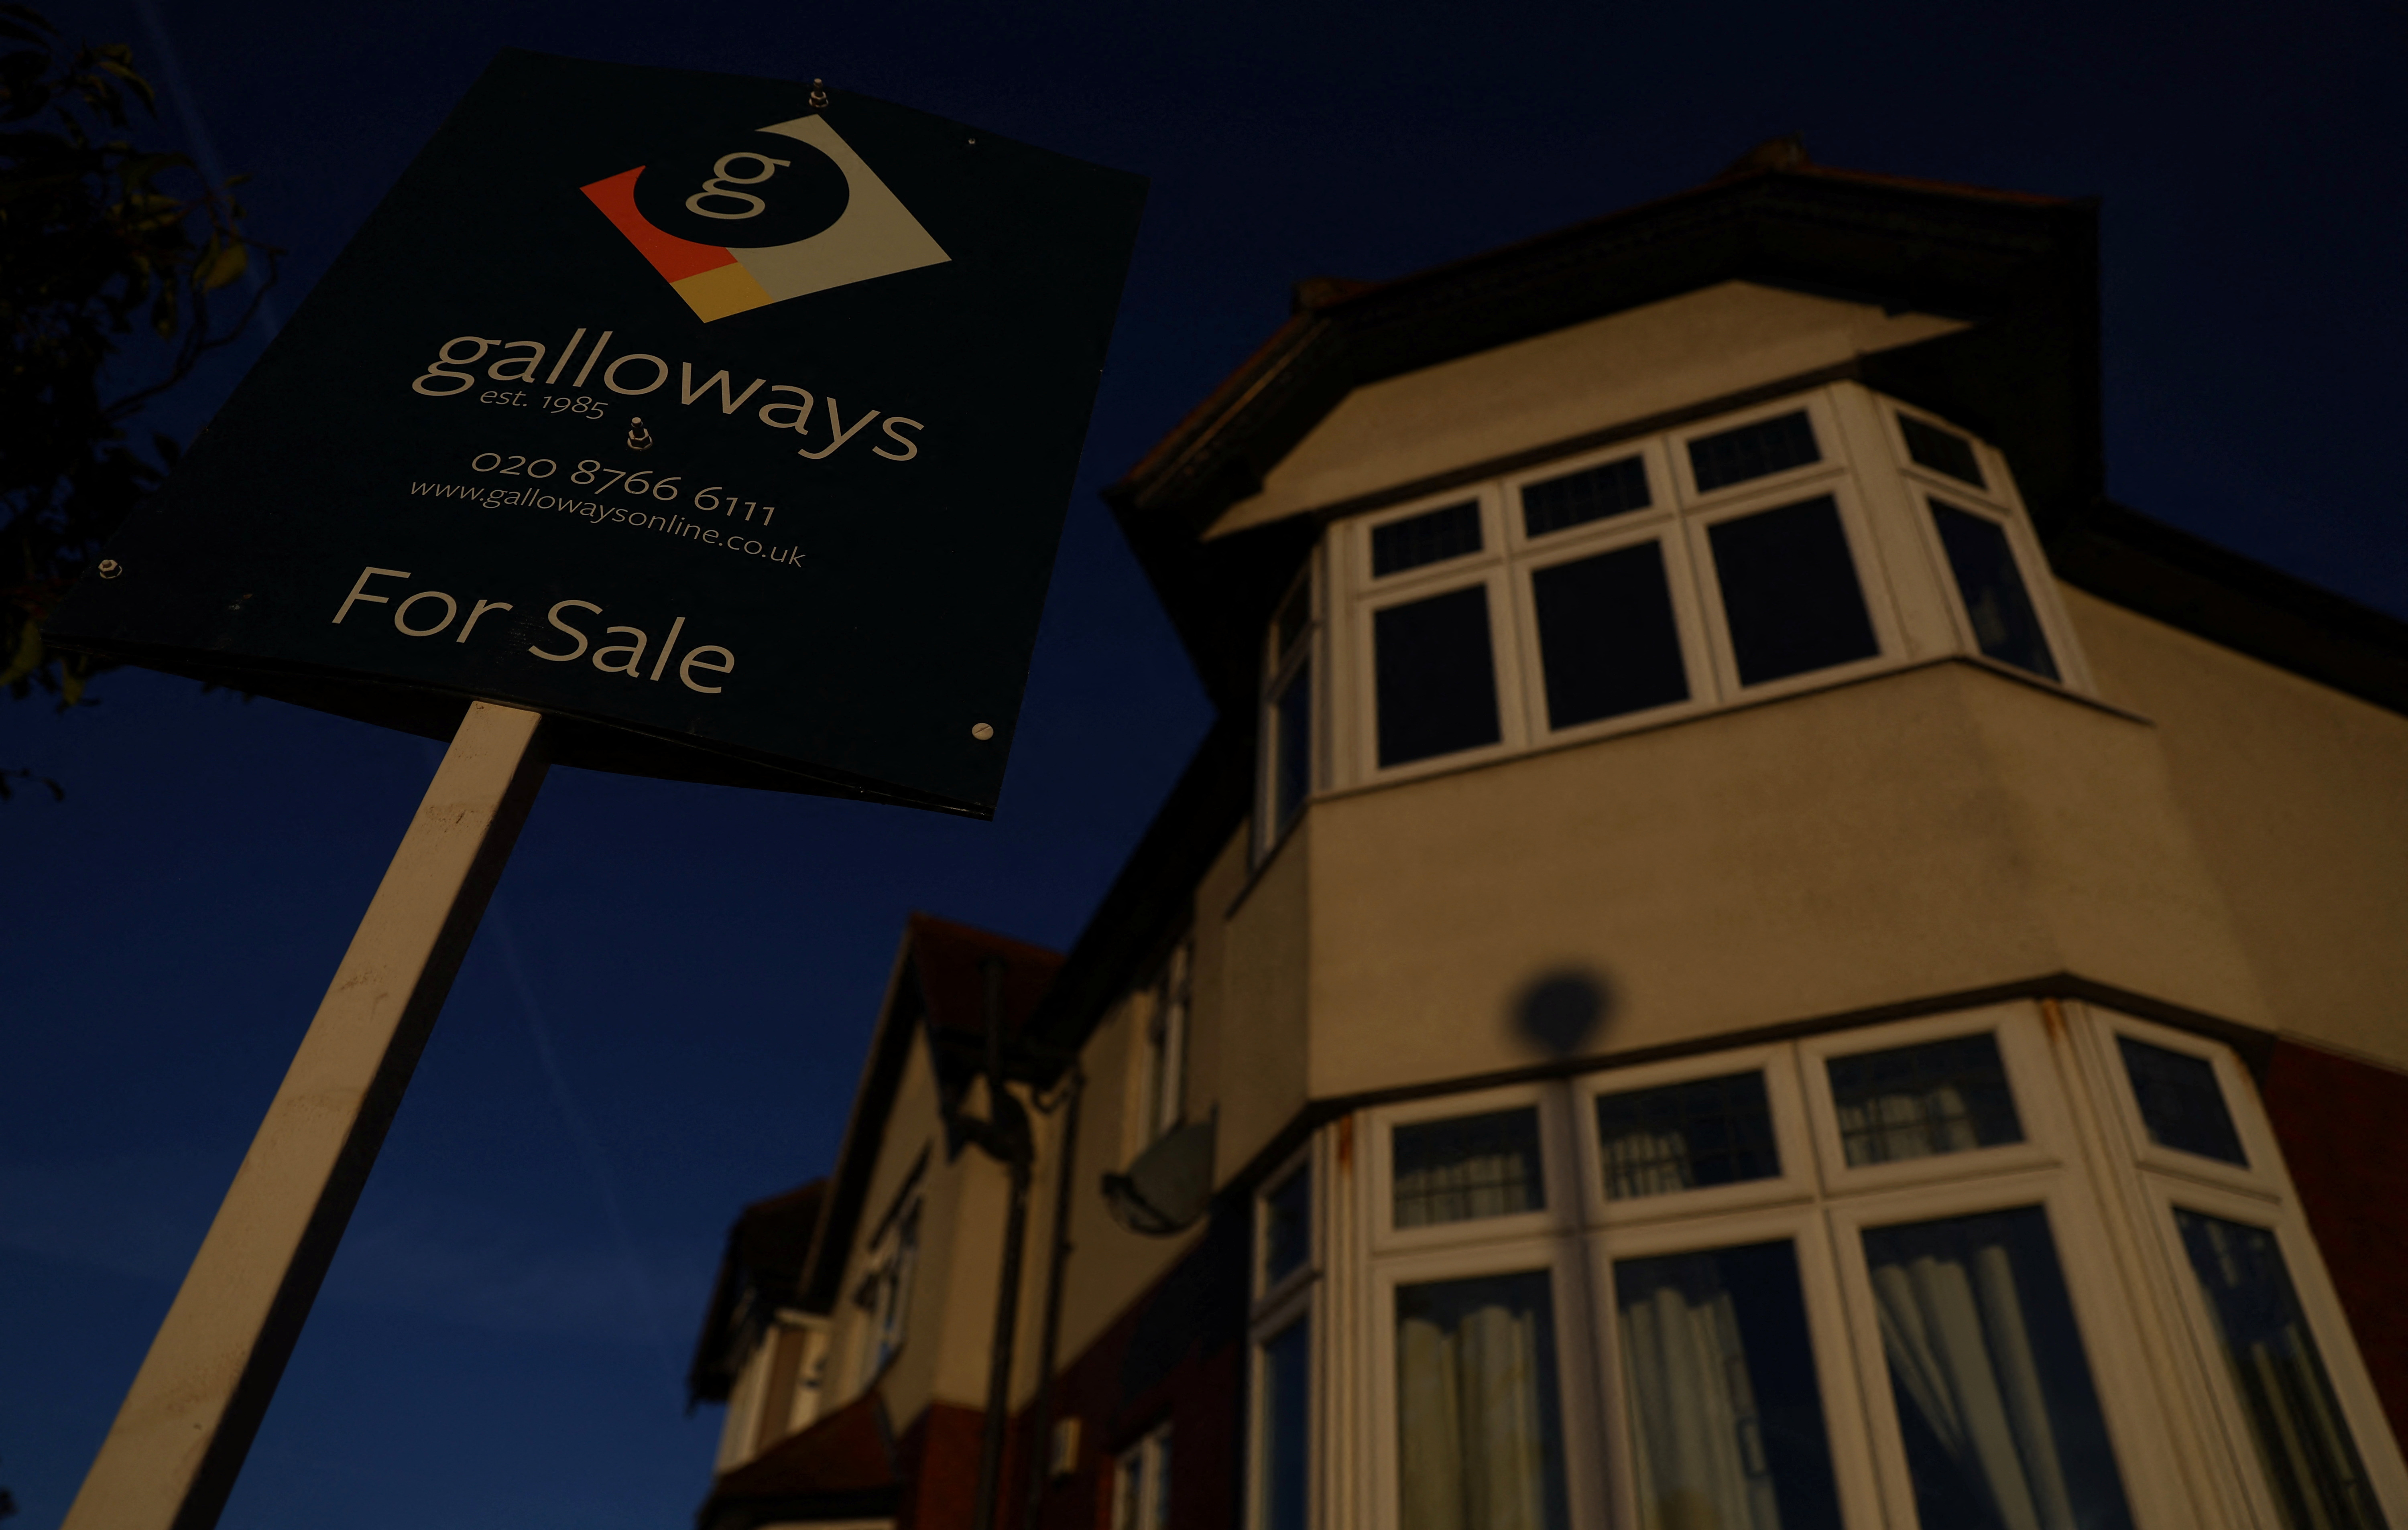 A ‘For Sale” sign is seen outside a residential house during sunrise in London